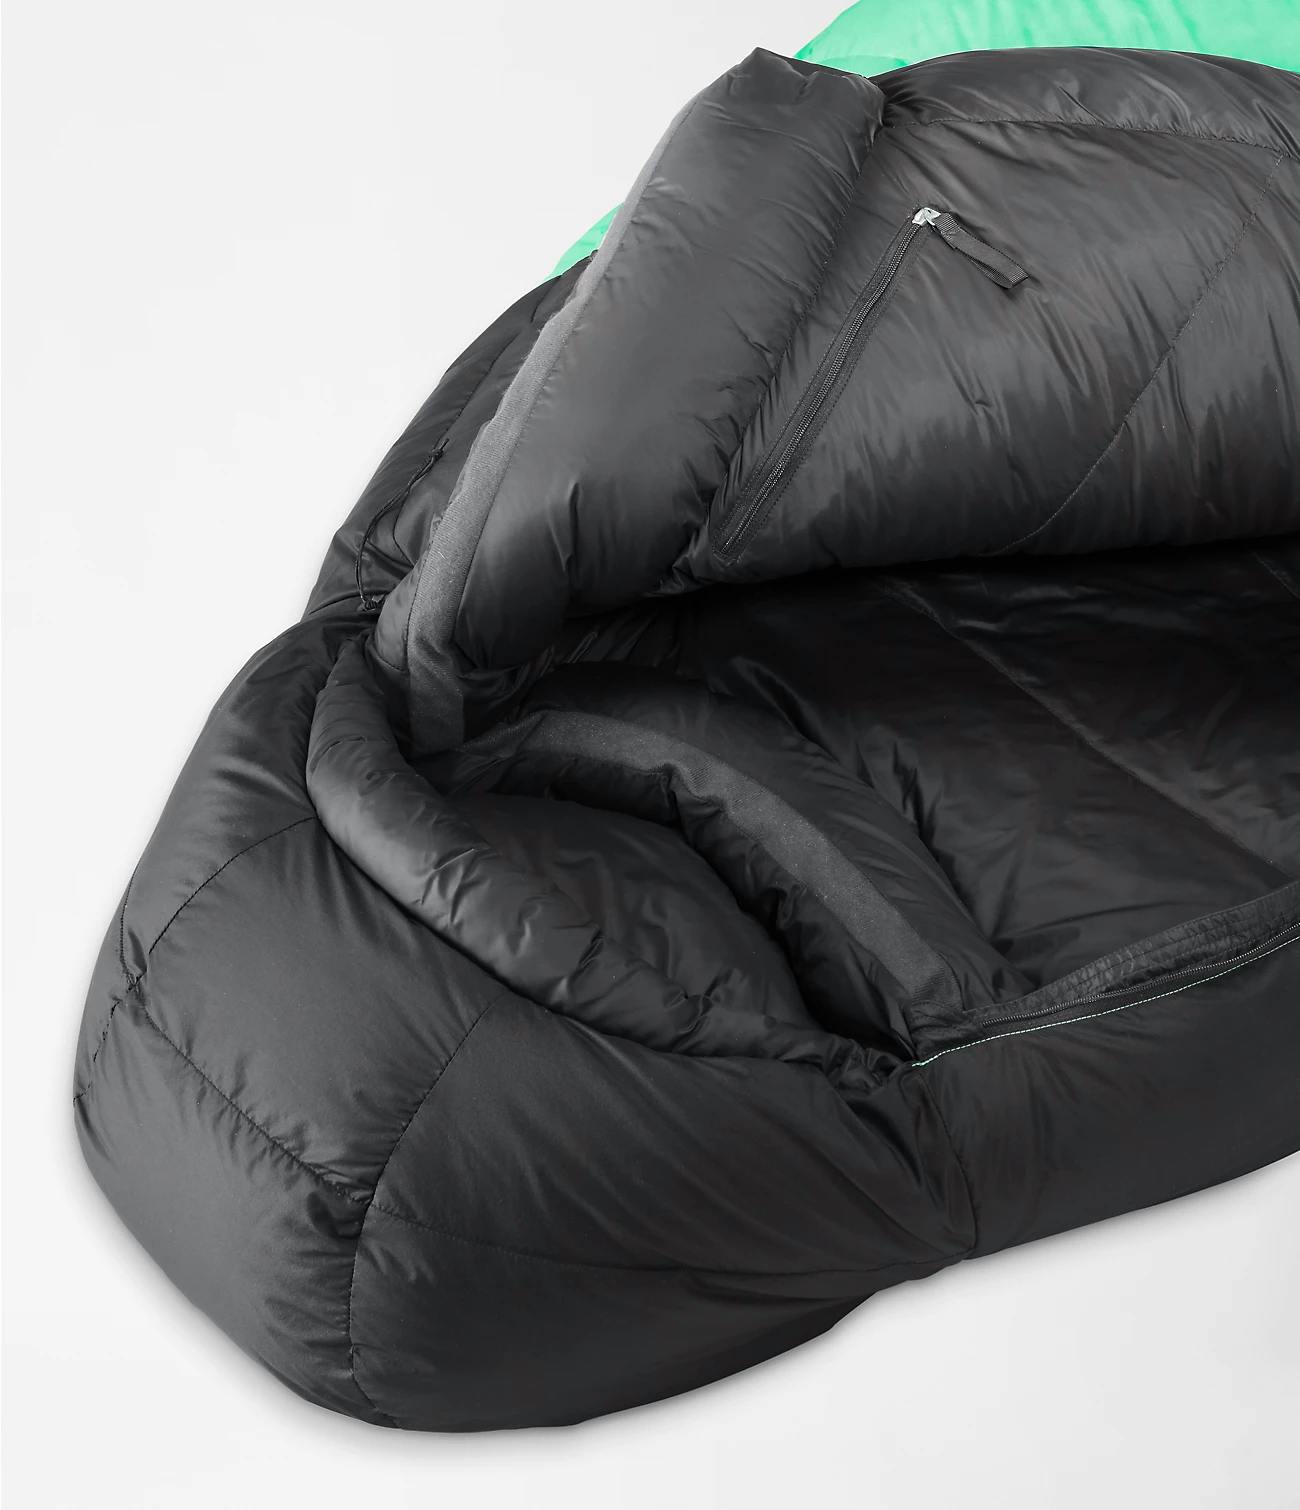 The North Face Inferno 0 Sleeping Bag